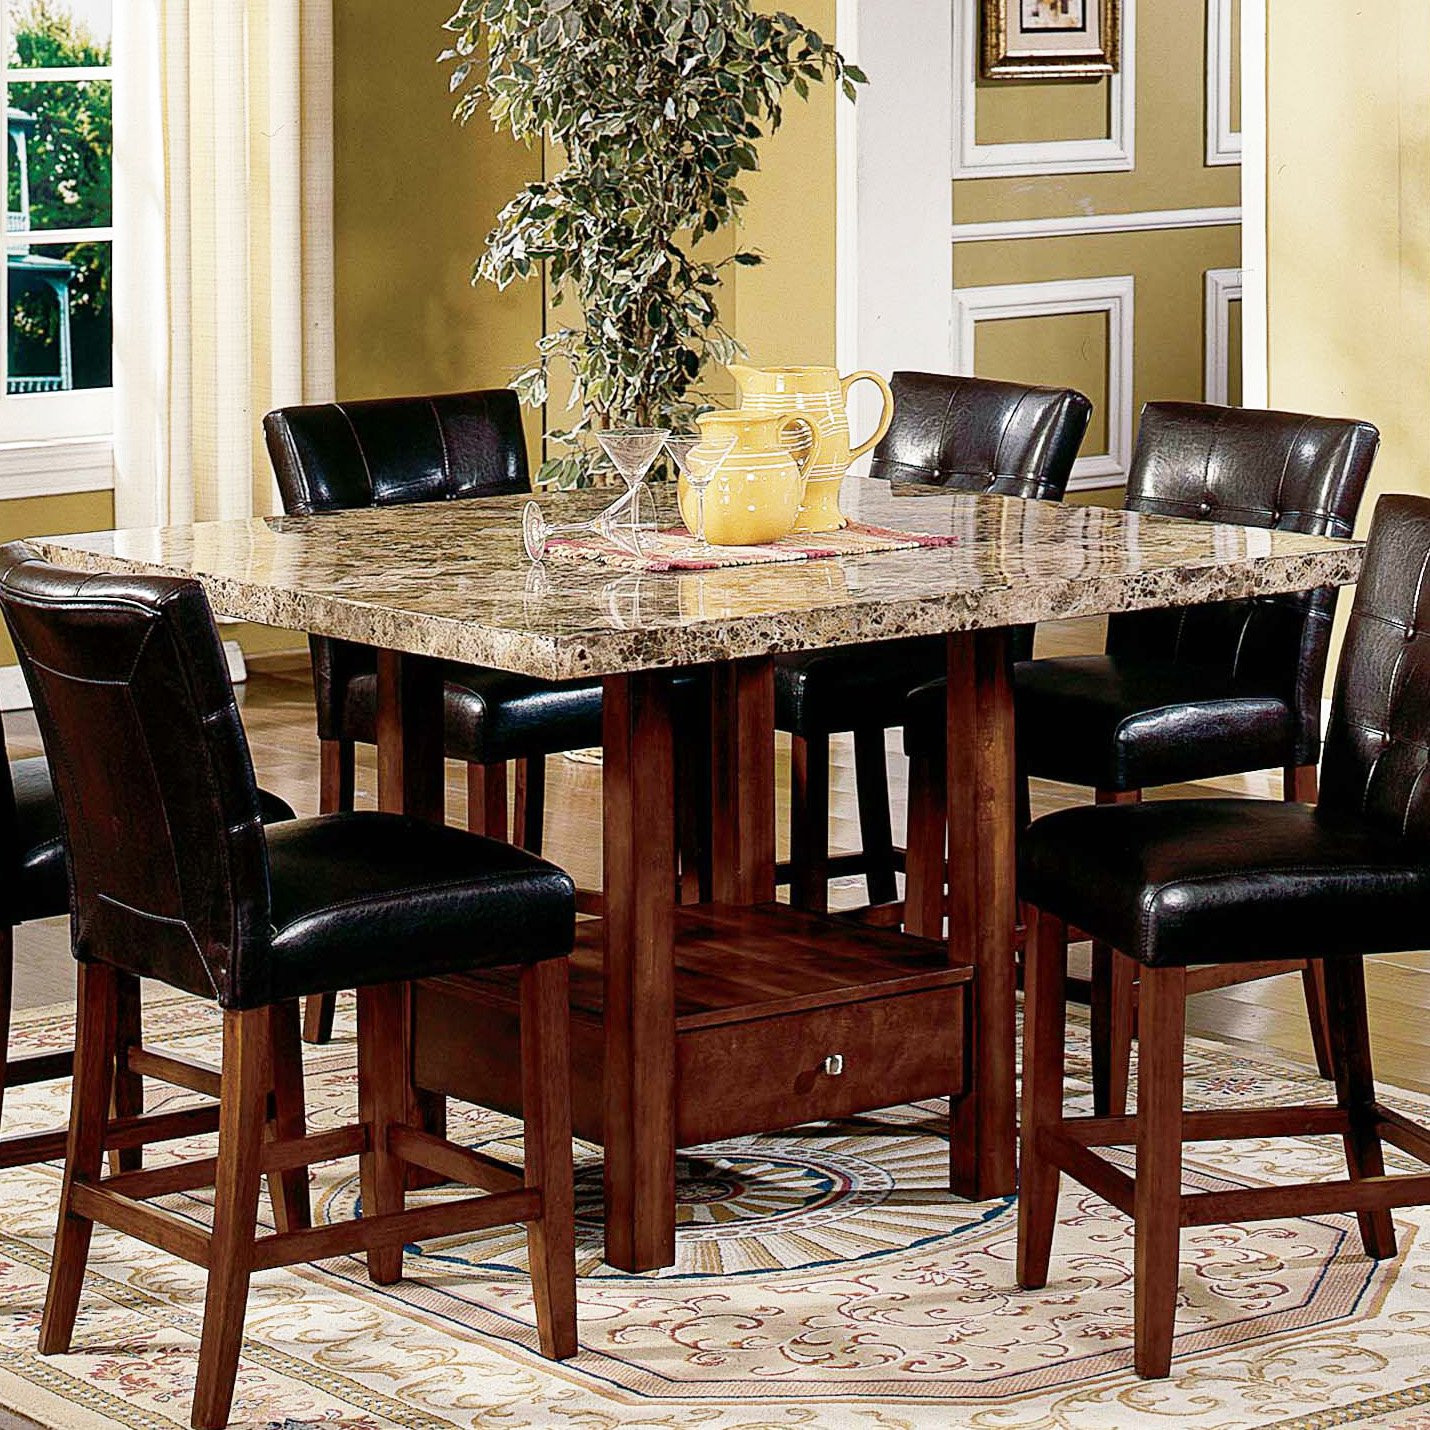 Kitchen Tables With Storage
 Steve Silver Montibello Marble Top Counter Height Storage